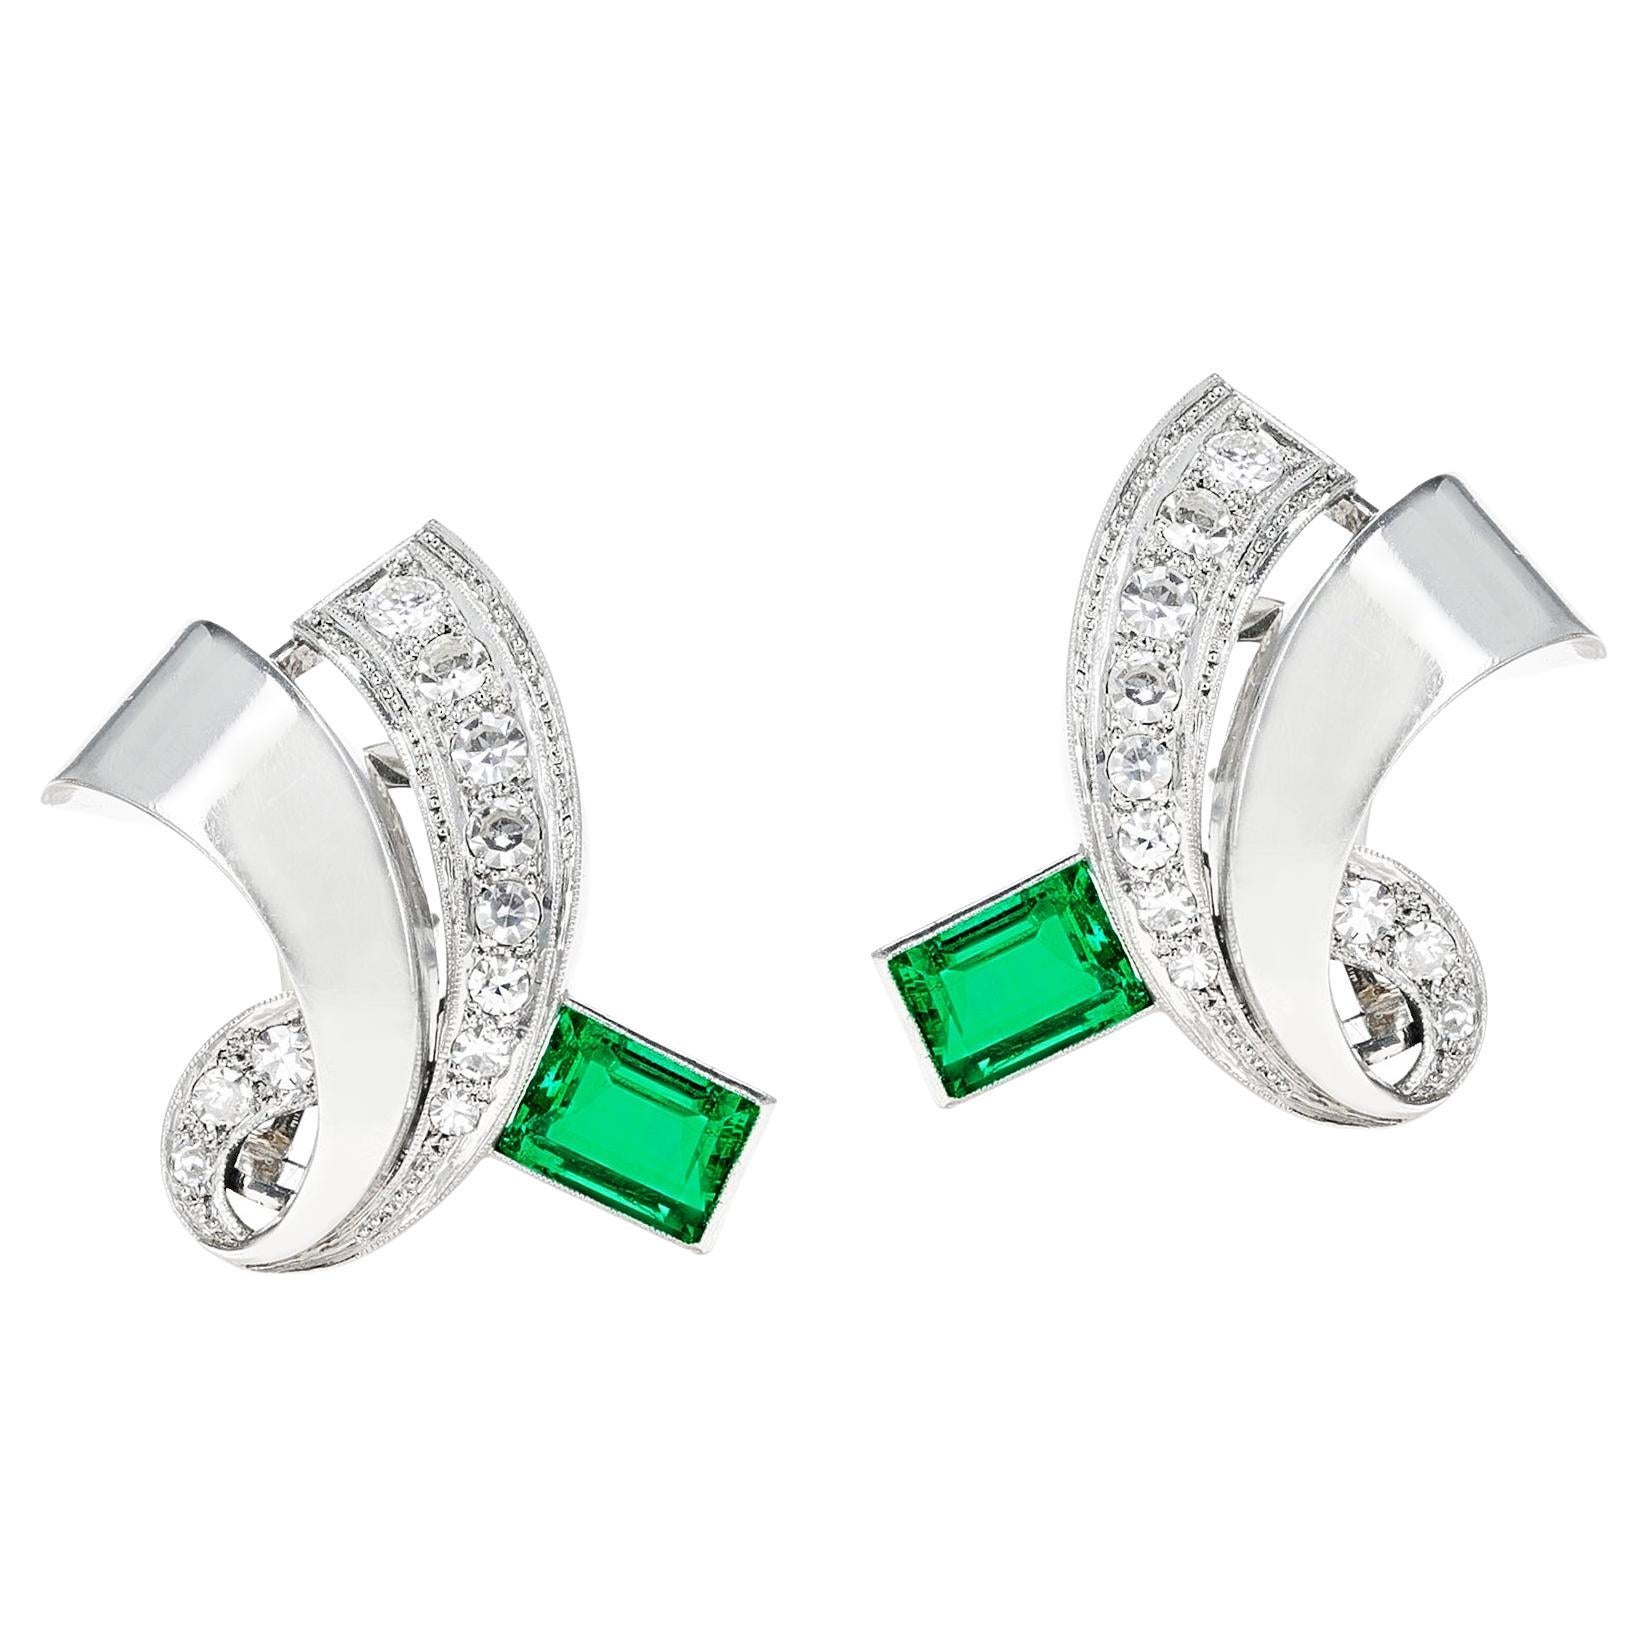 GIA Certified No-Oil Rectangular Colombian Emeralds and Diamond Earrings, PT For Sale